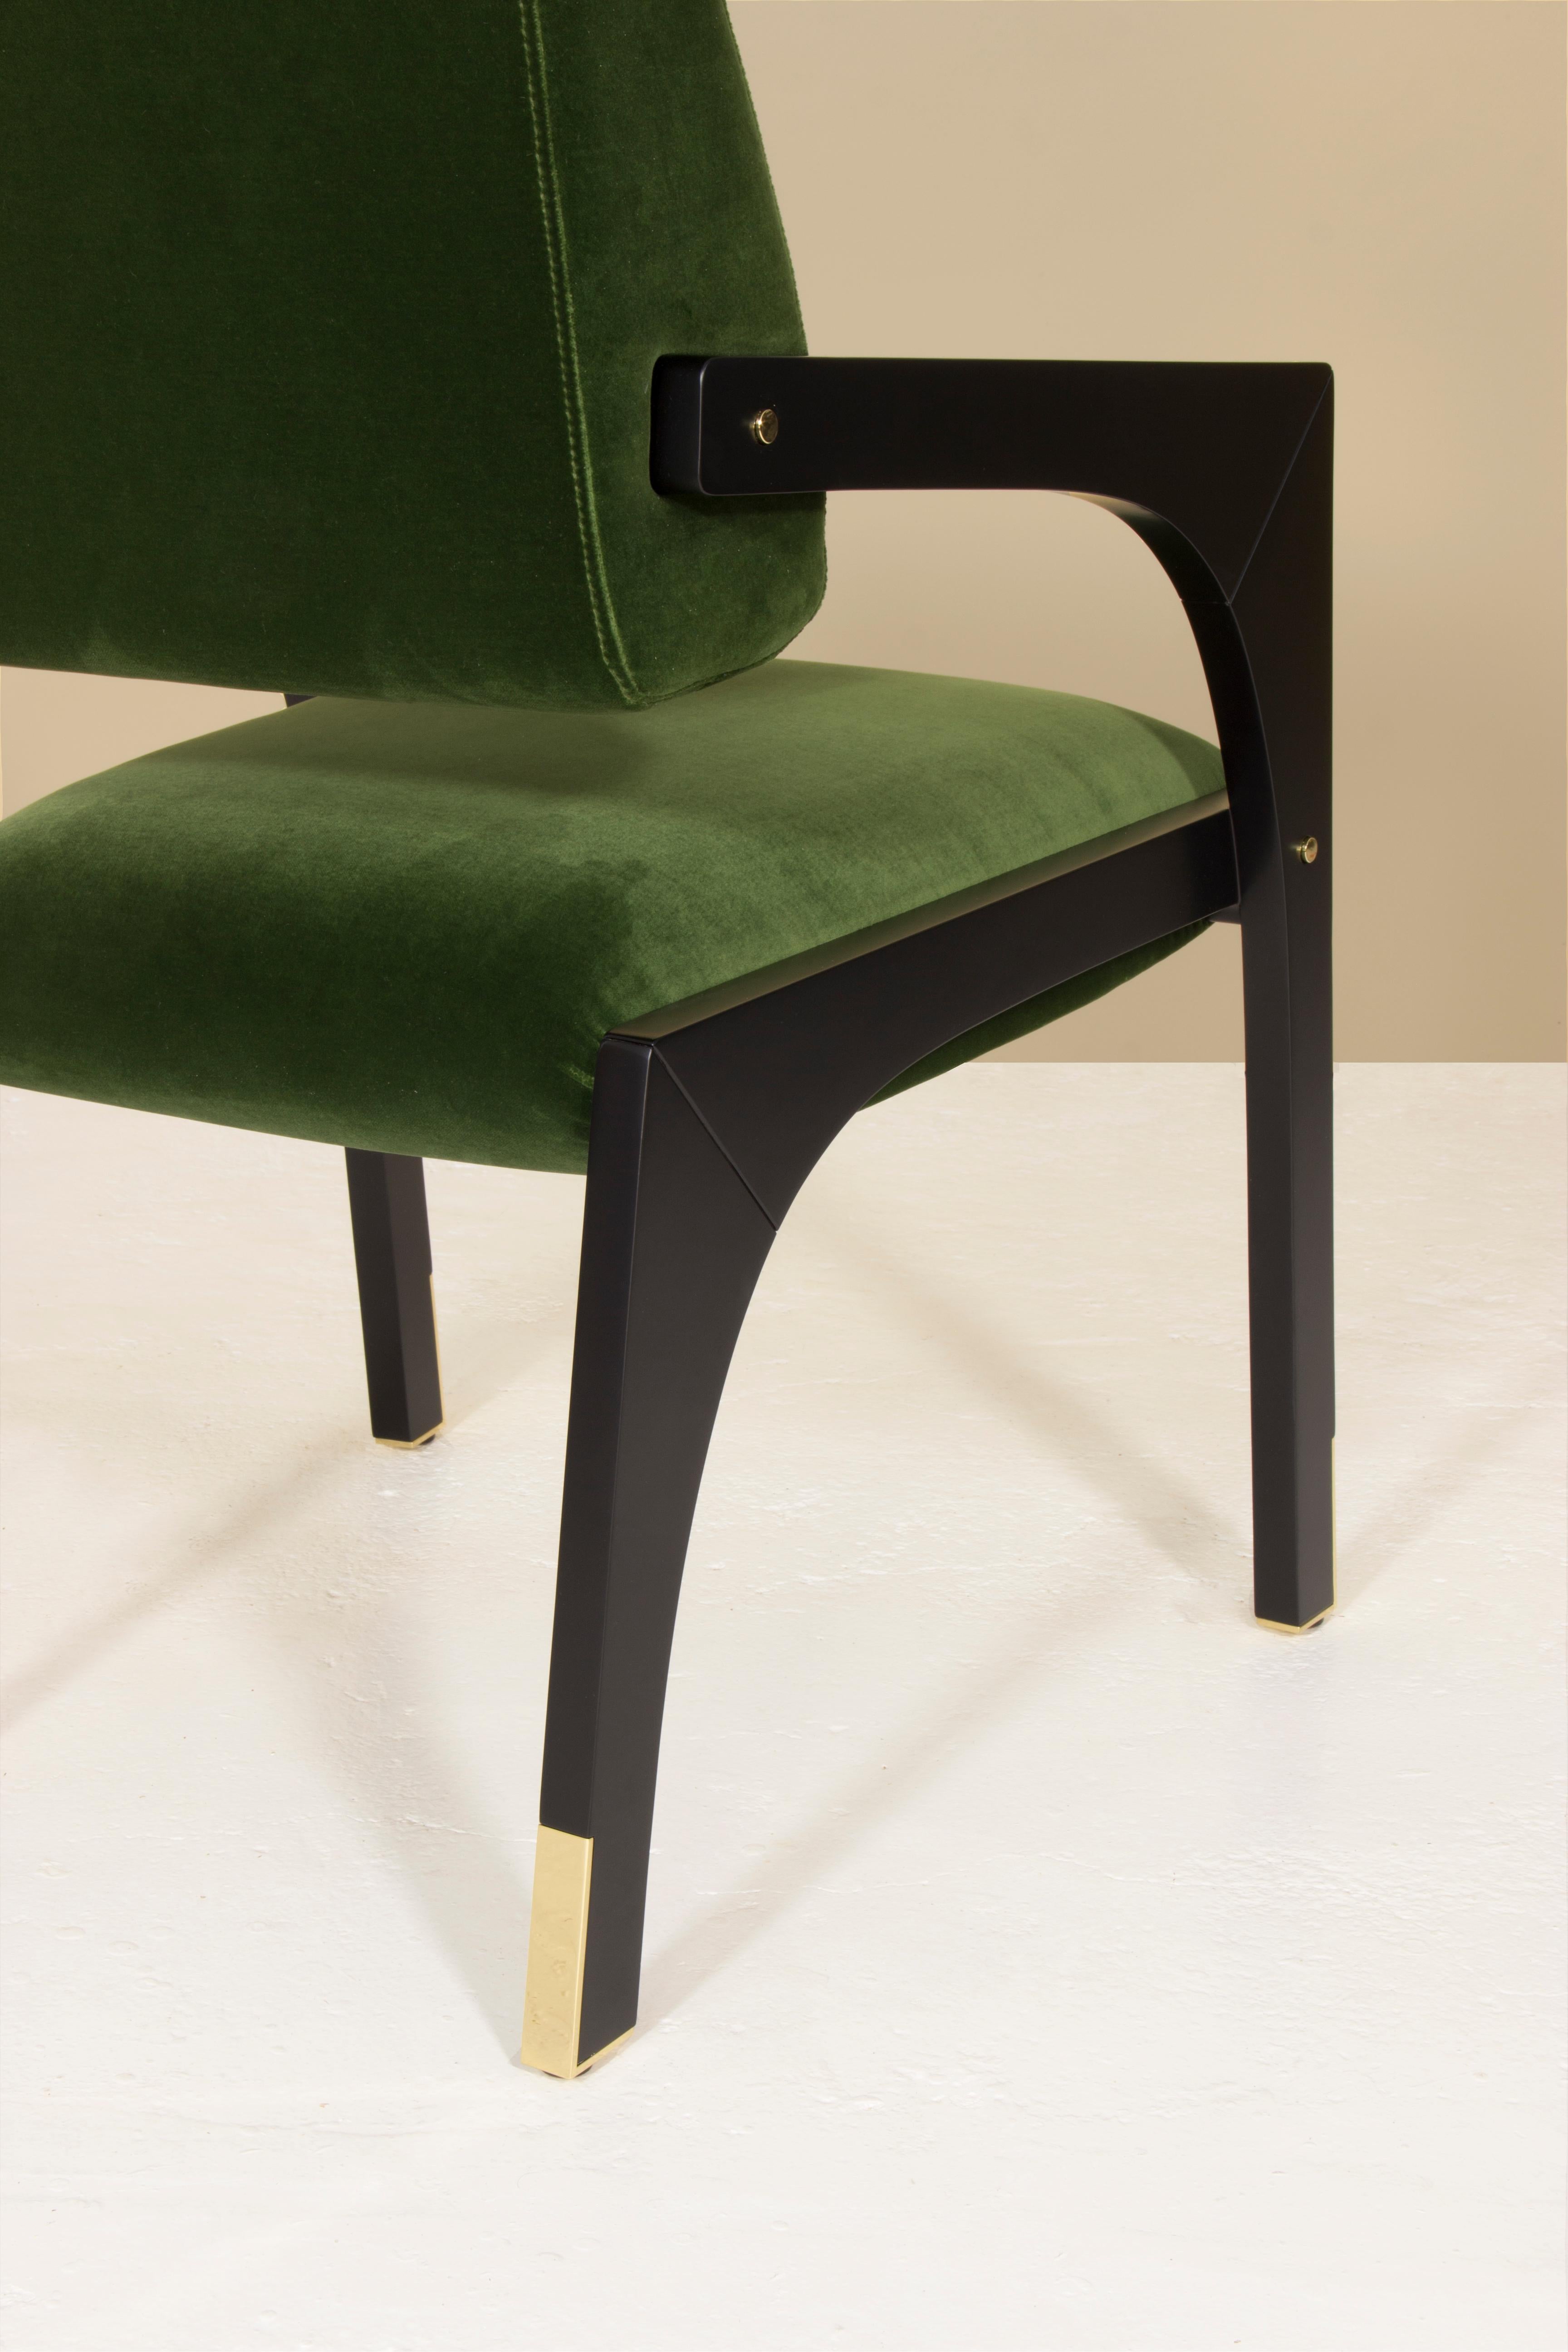 Arches Dining Chair, Velvet & Brass, InsidherLand by Joana Santos Barbosa In New Condition For Sale In Maia, Porto